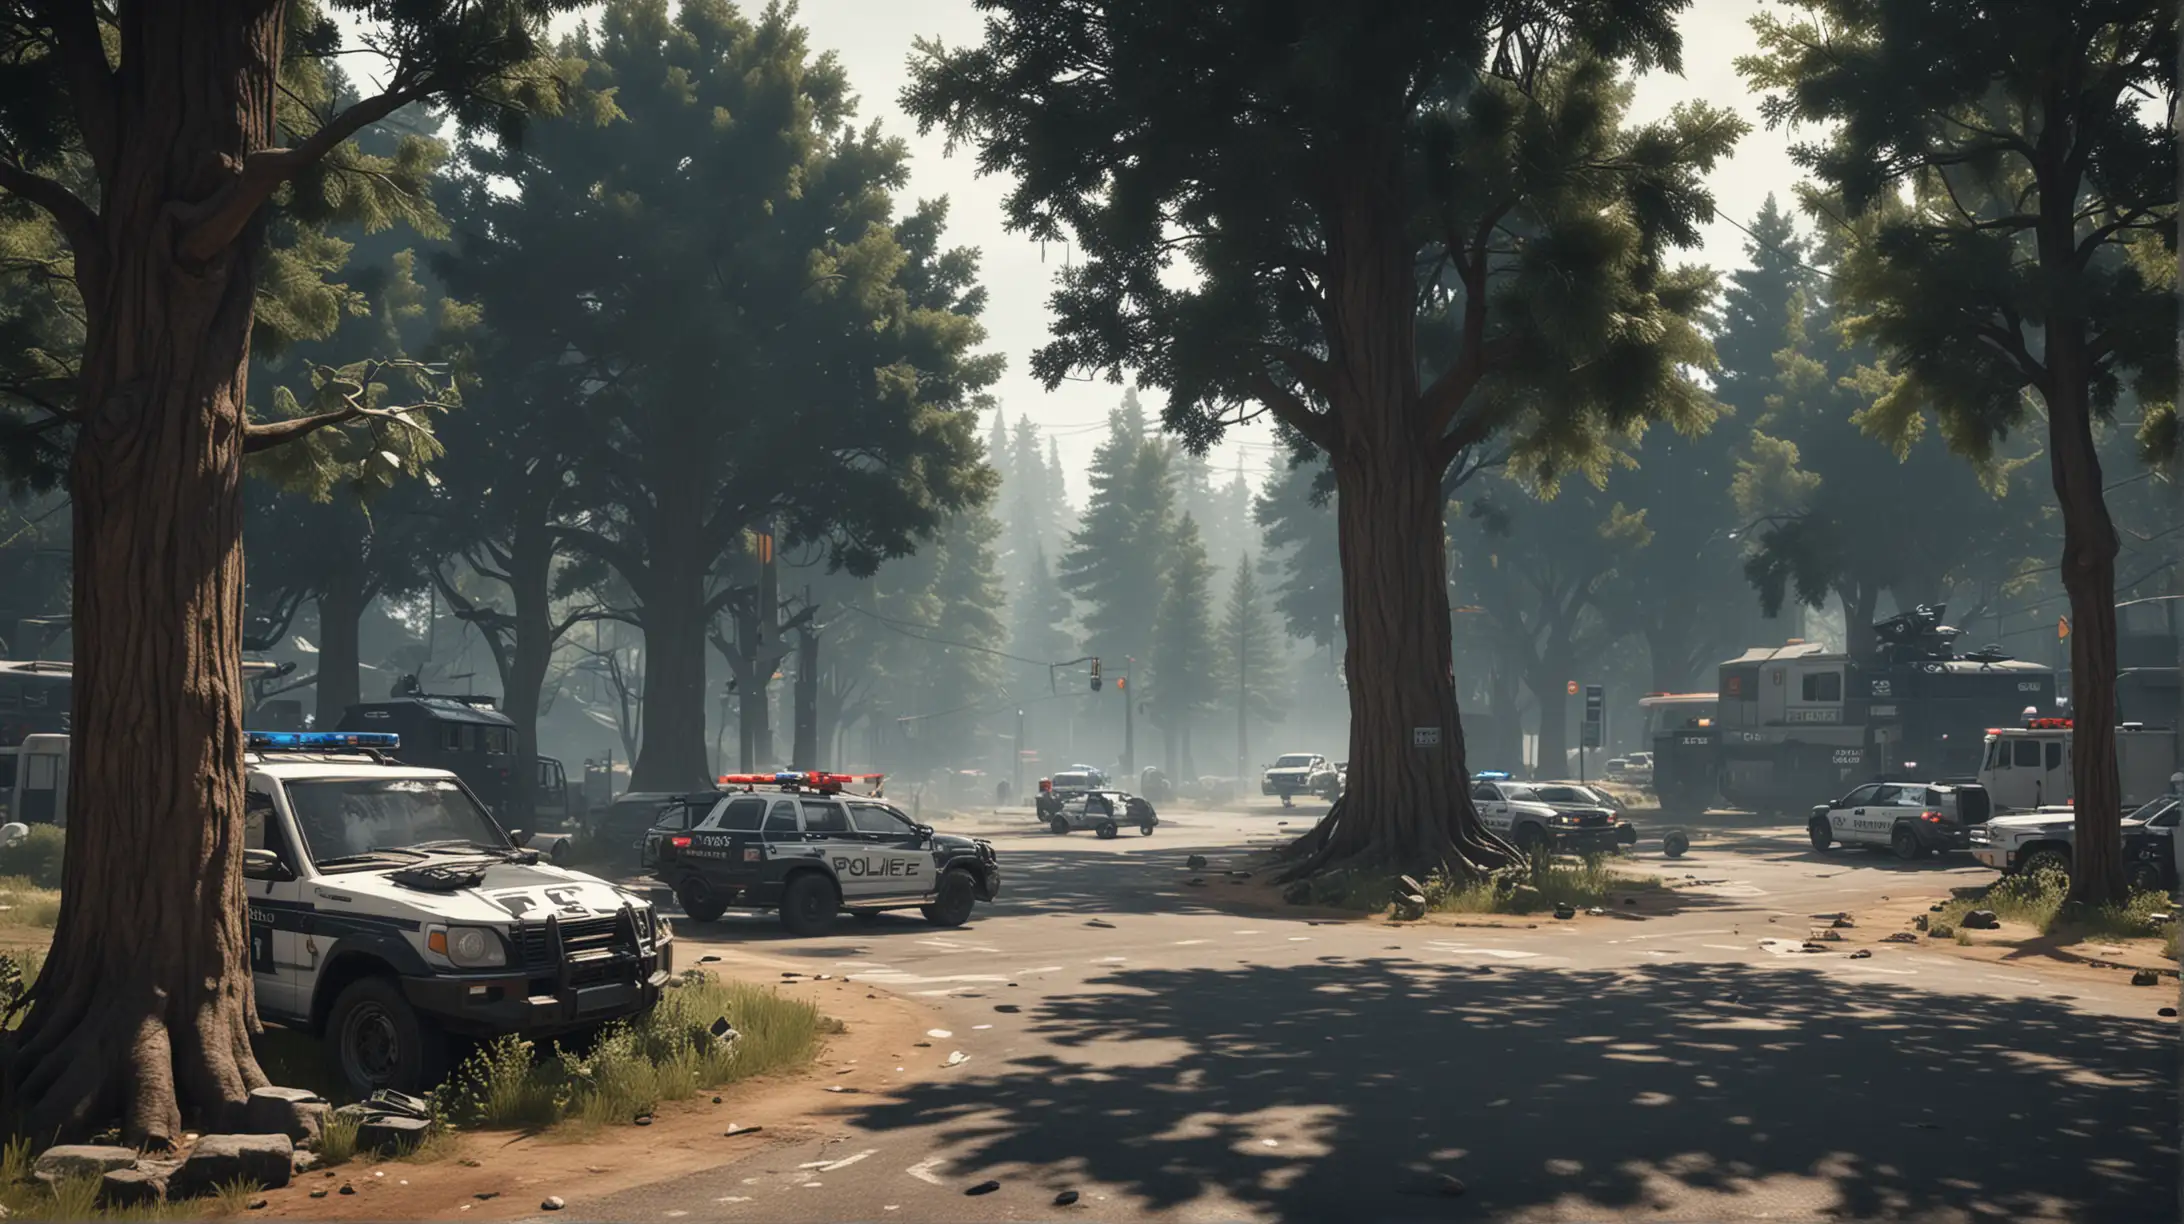 Swat game Scene. Elements of mechanical. Gaming themed. Big tree in background. No characters. Police cars.